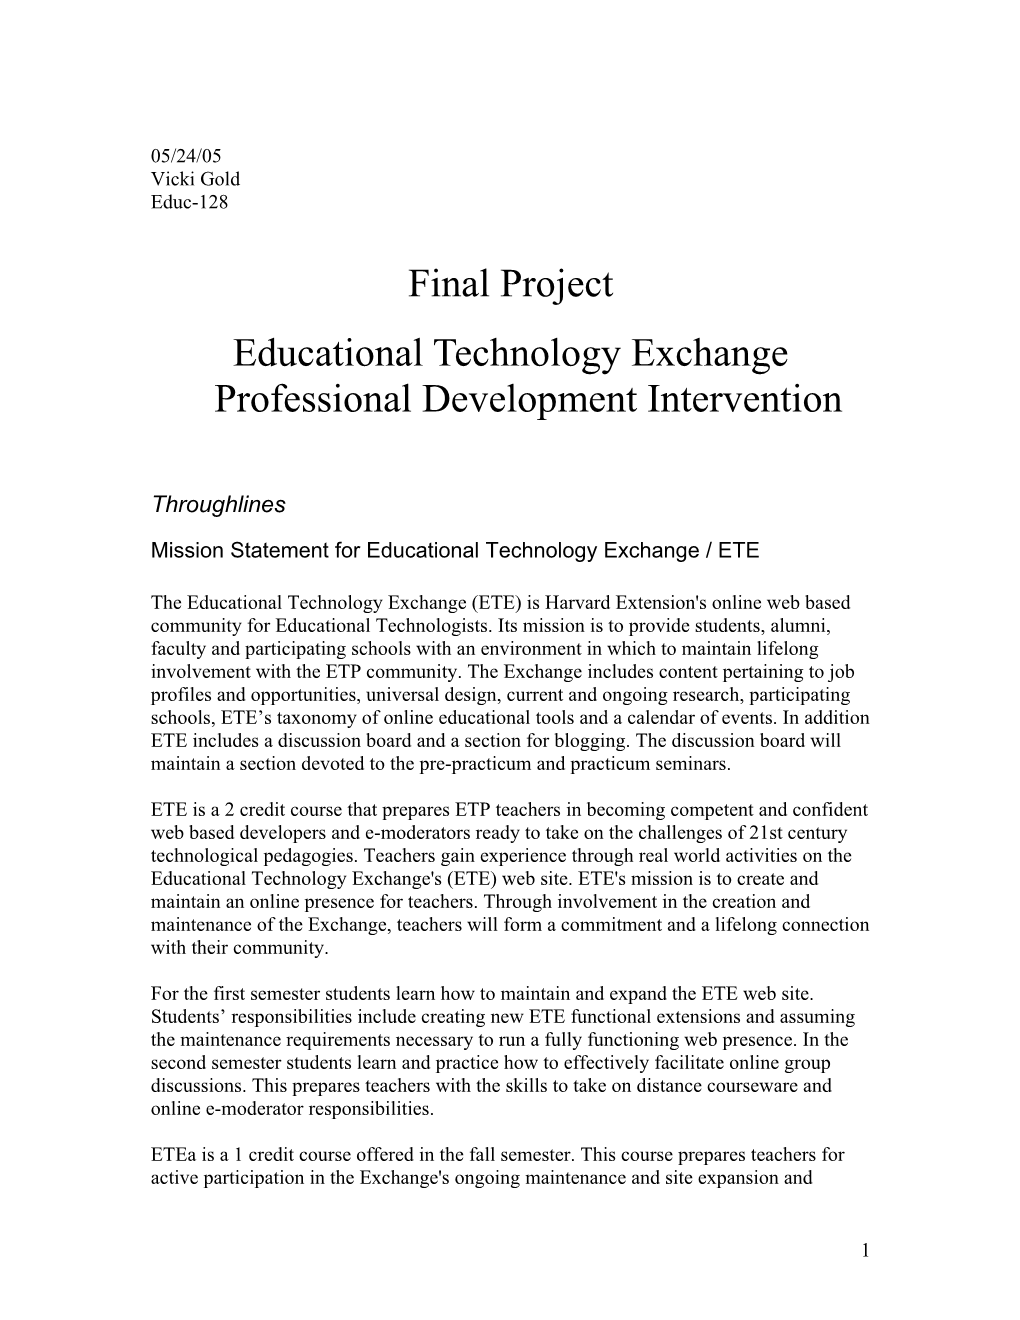 Mission Statement for Educational Technology Exchange / ETE